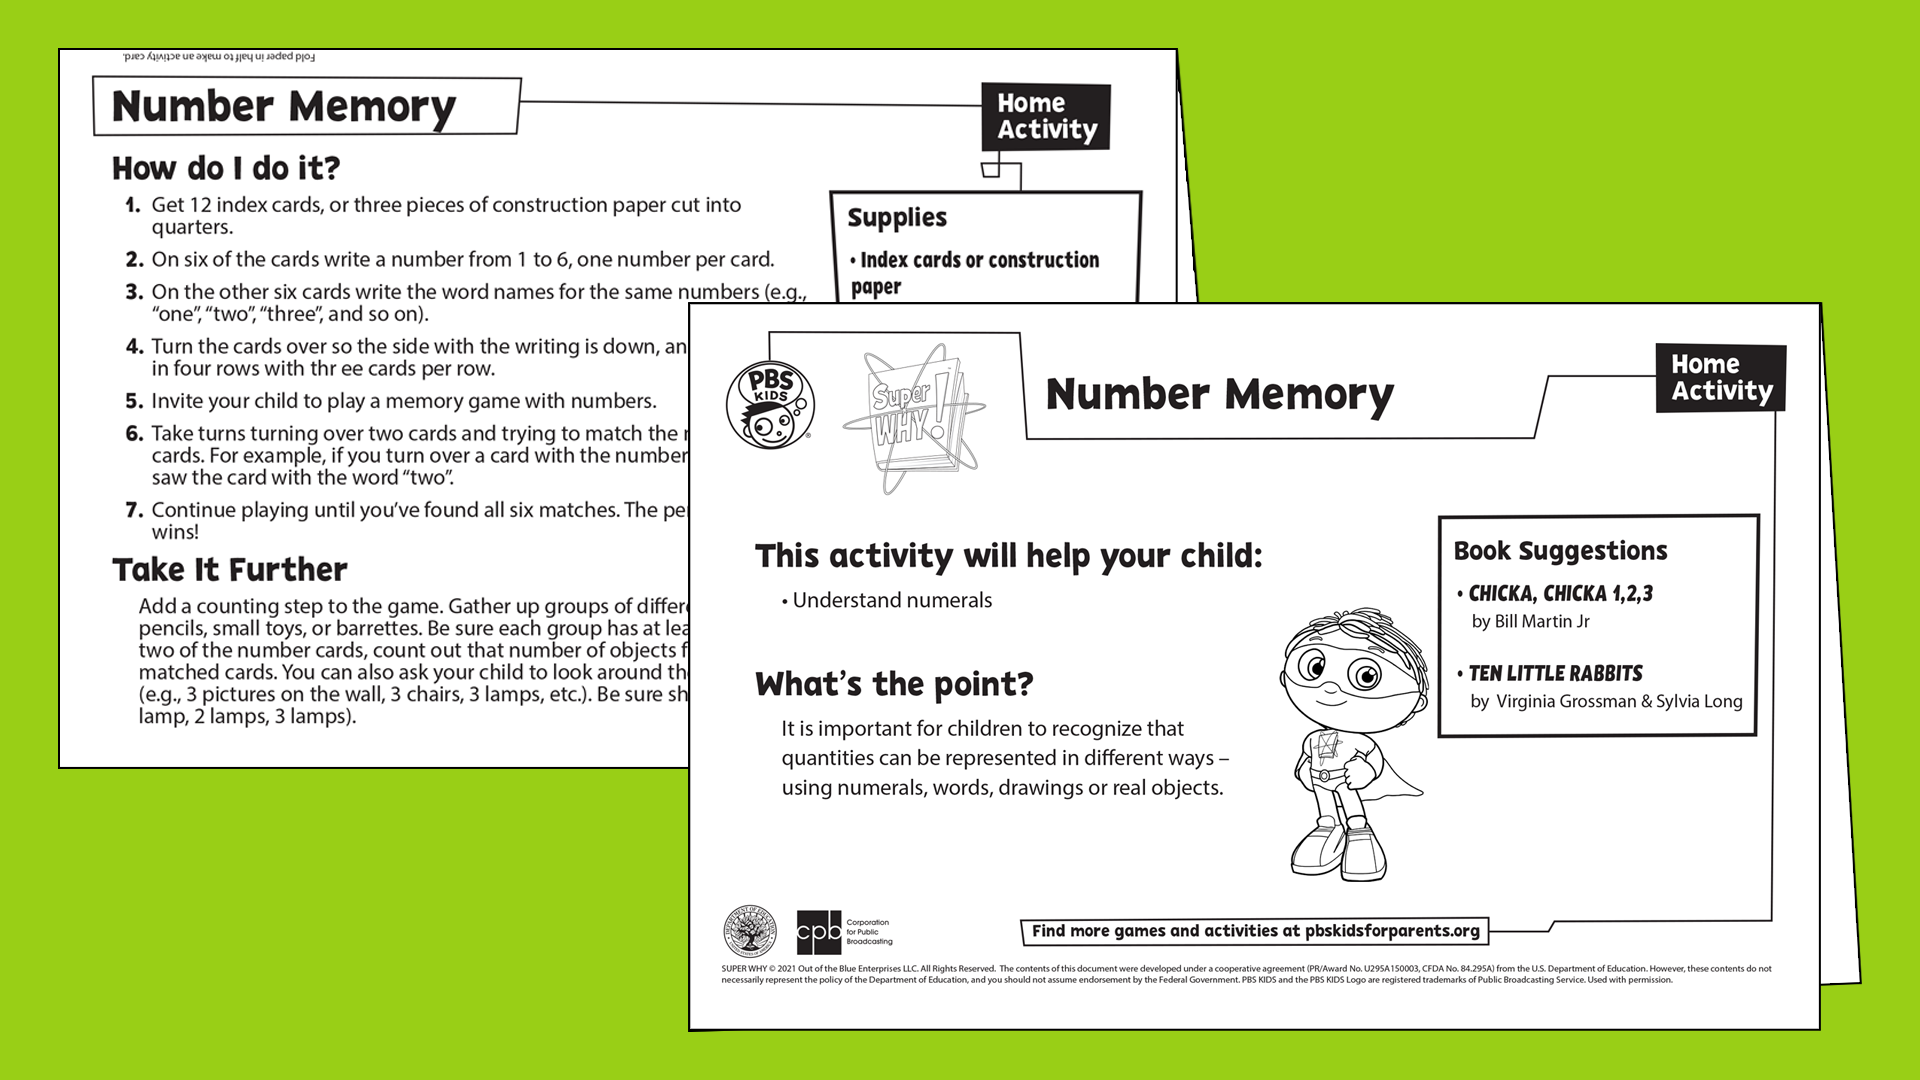 Number Memory Home Activity, Super Why!